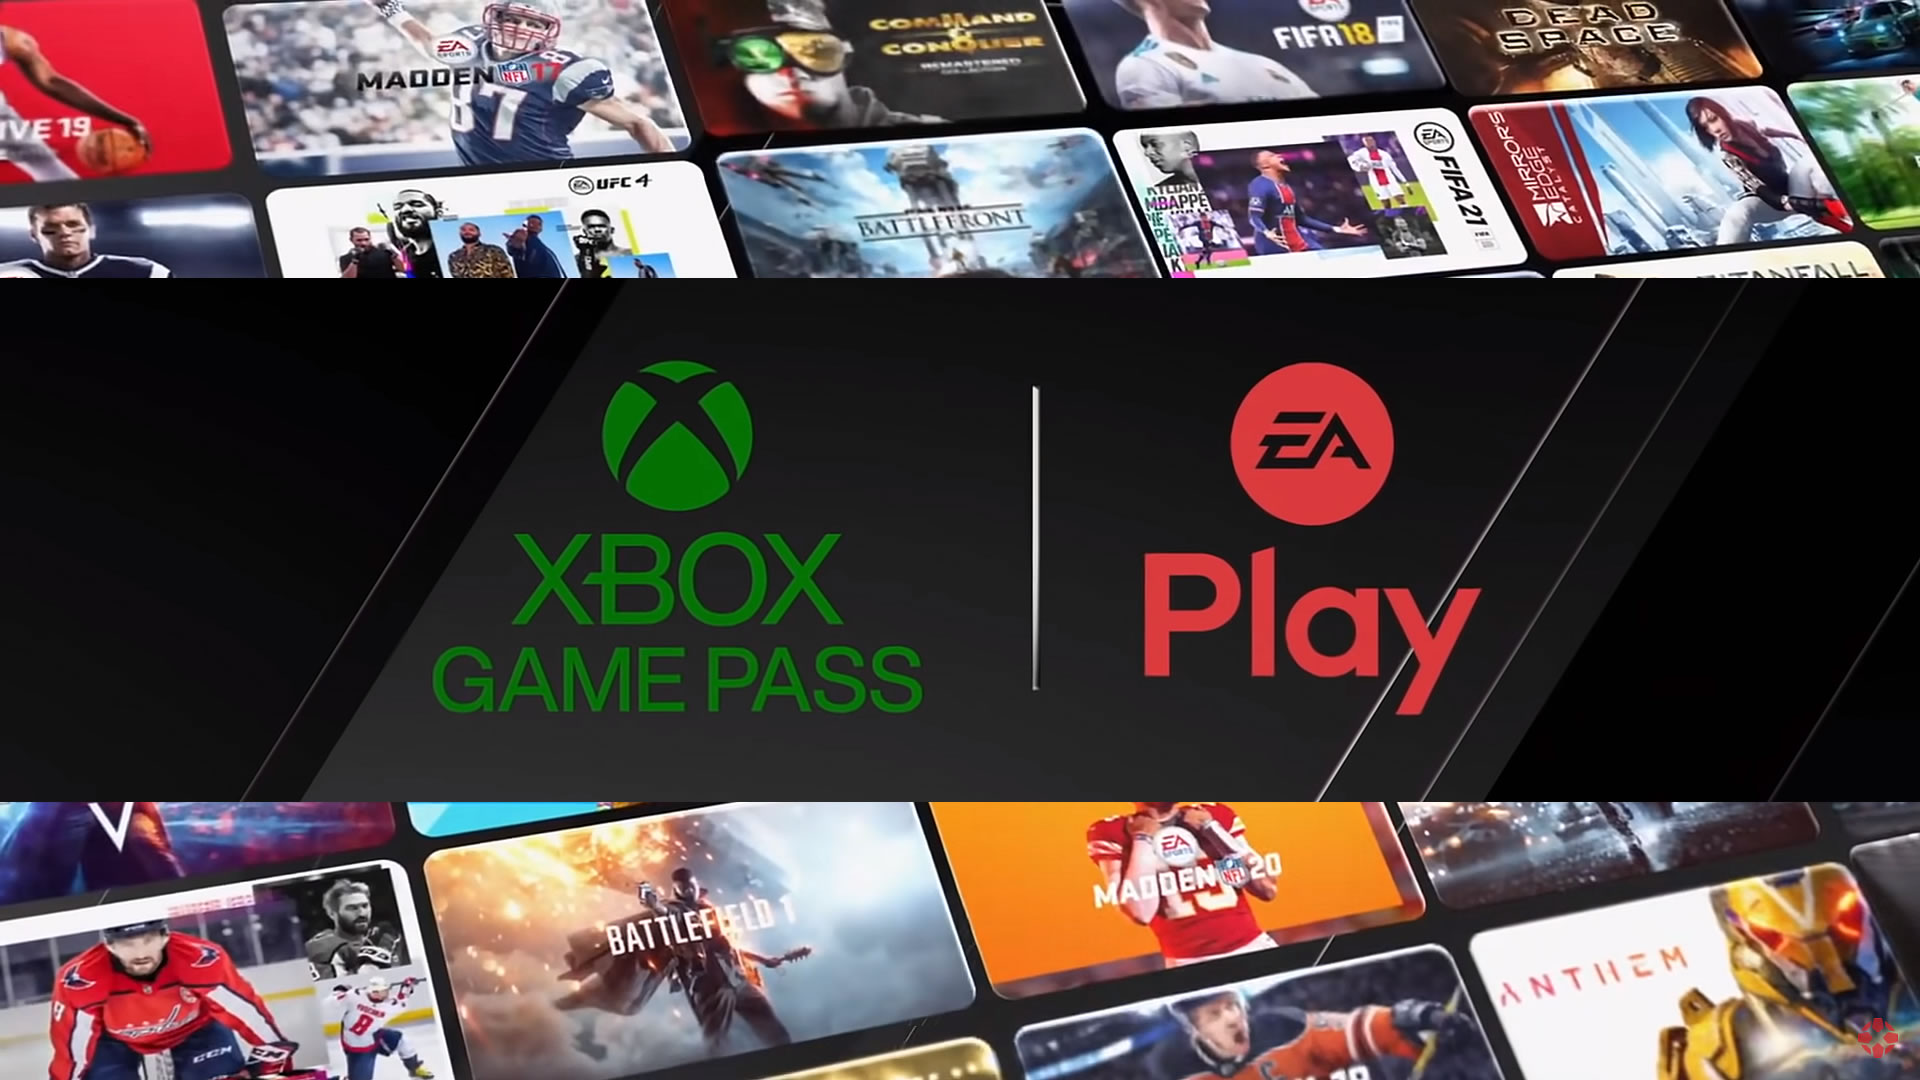 ea play to game pass conversion